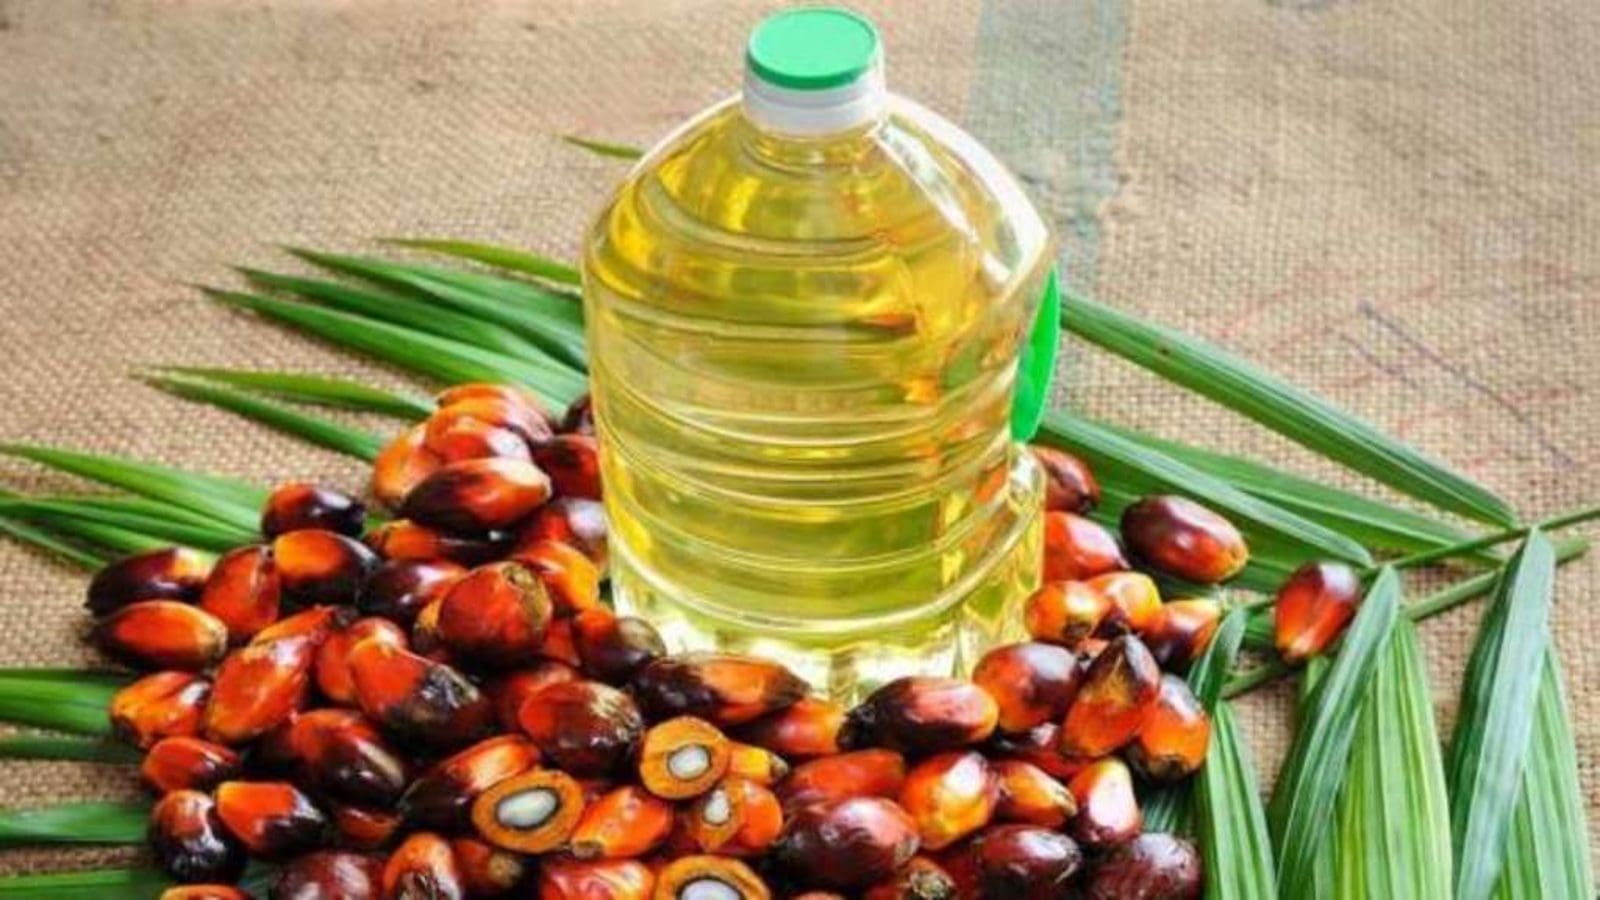 KALRO to distribute 2.5M palm seedlings as state plots to cut edible oil import dependency